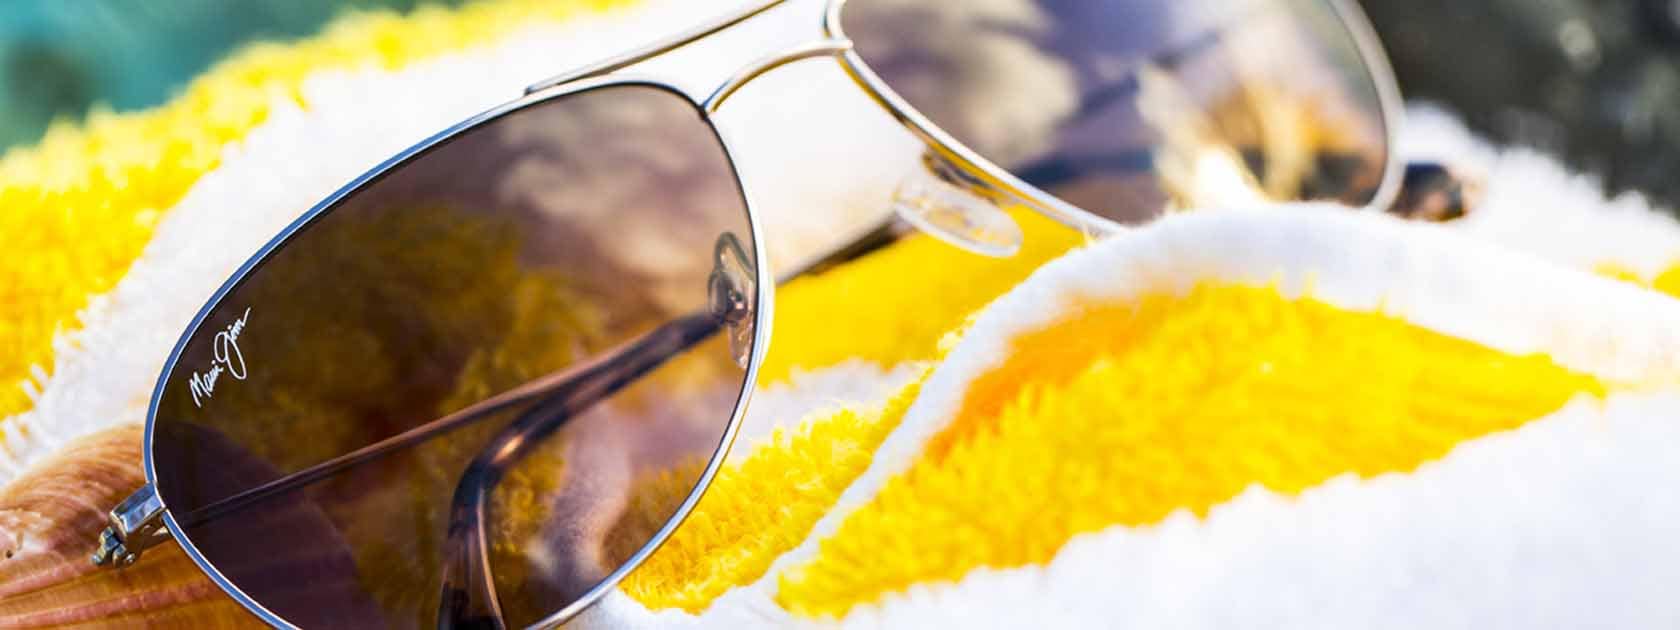 silver frame aviator sunglasses with gray lenses displayed on yellow and white striped towel